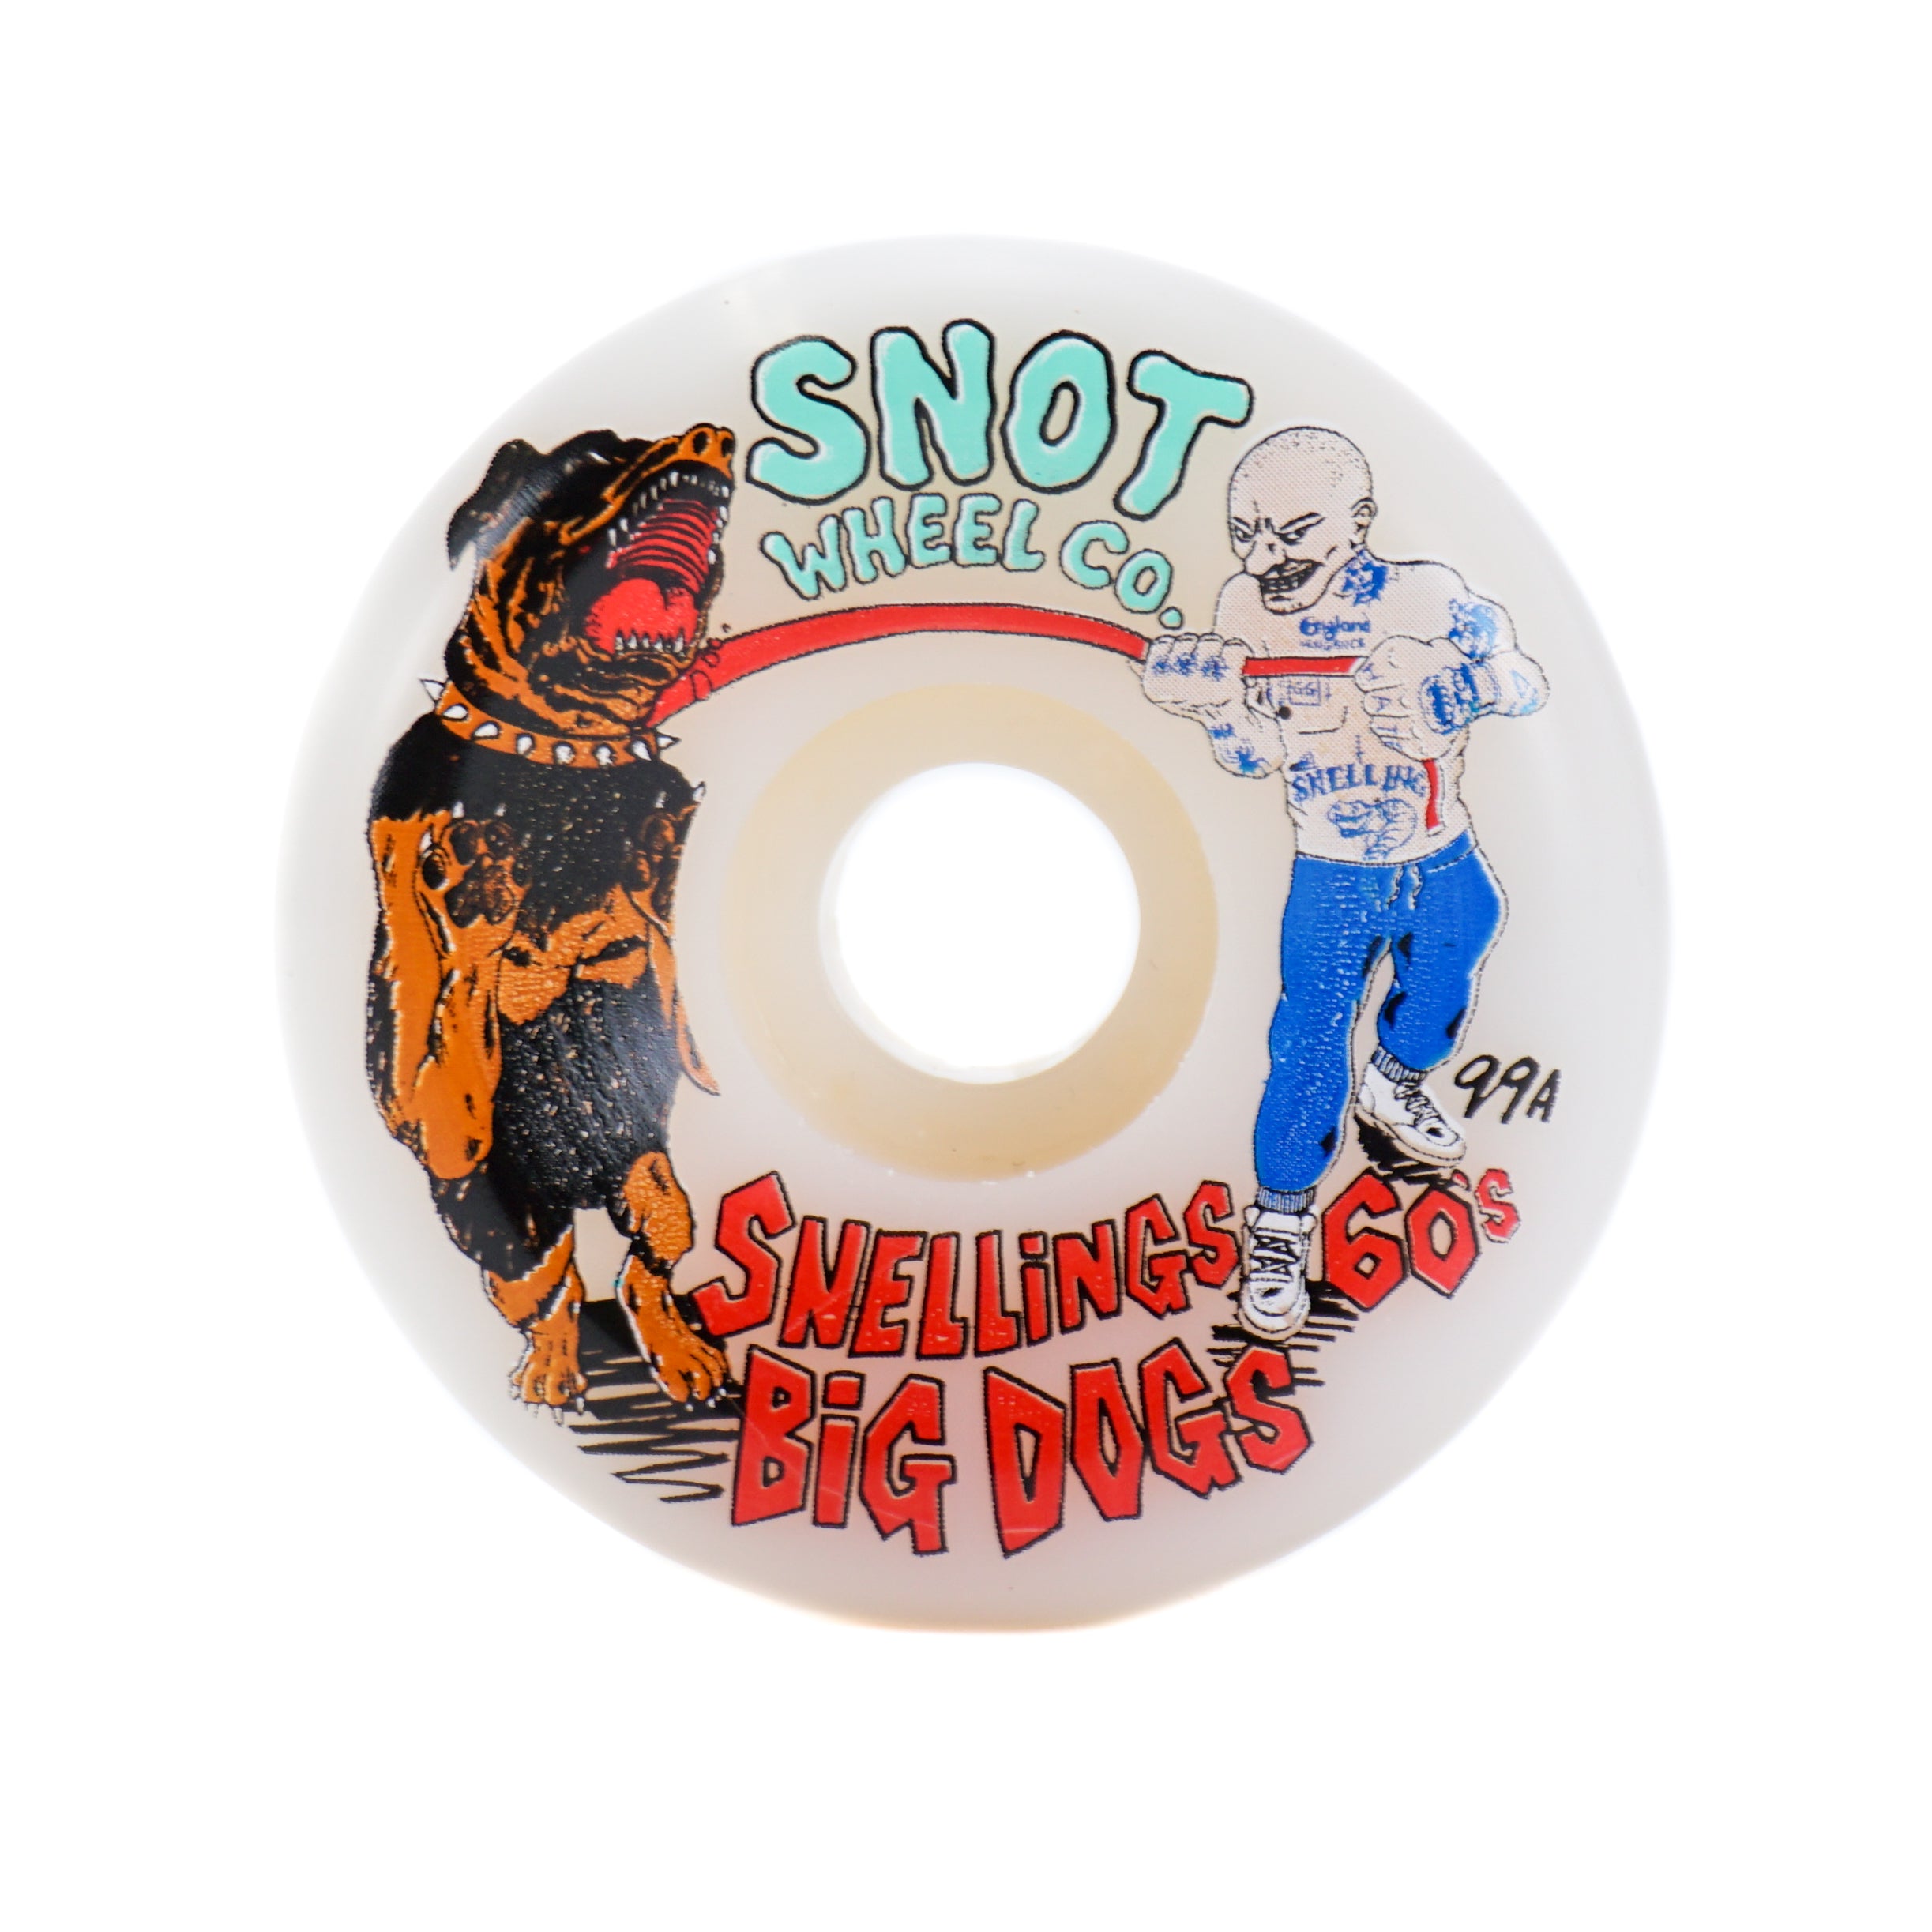 Snot Snellings Big Dogs - Transparent - 60mm